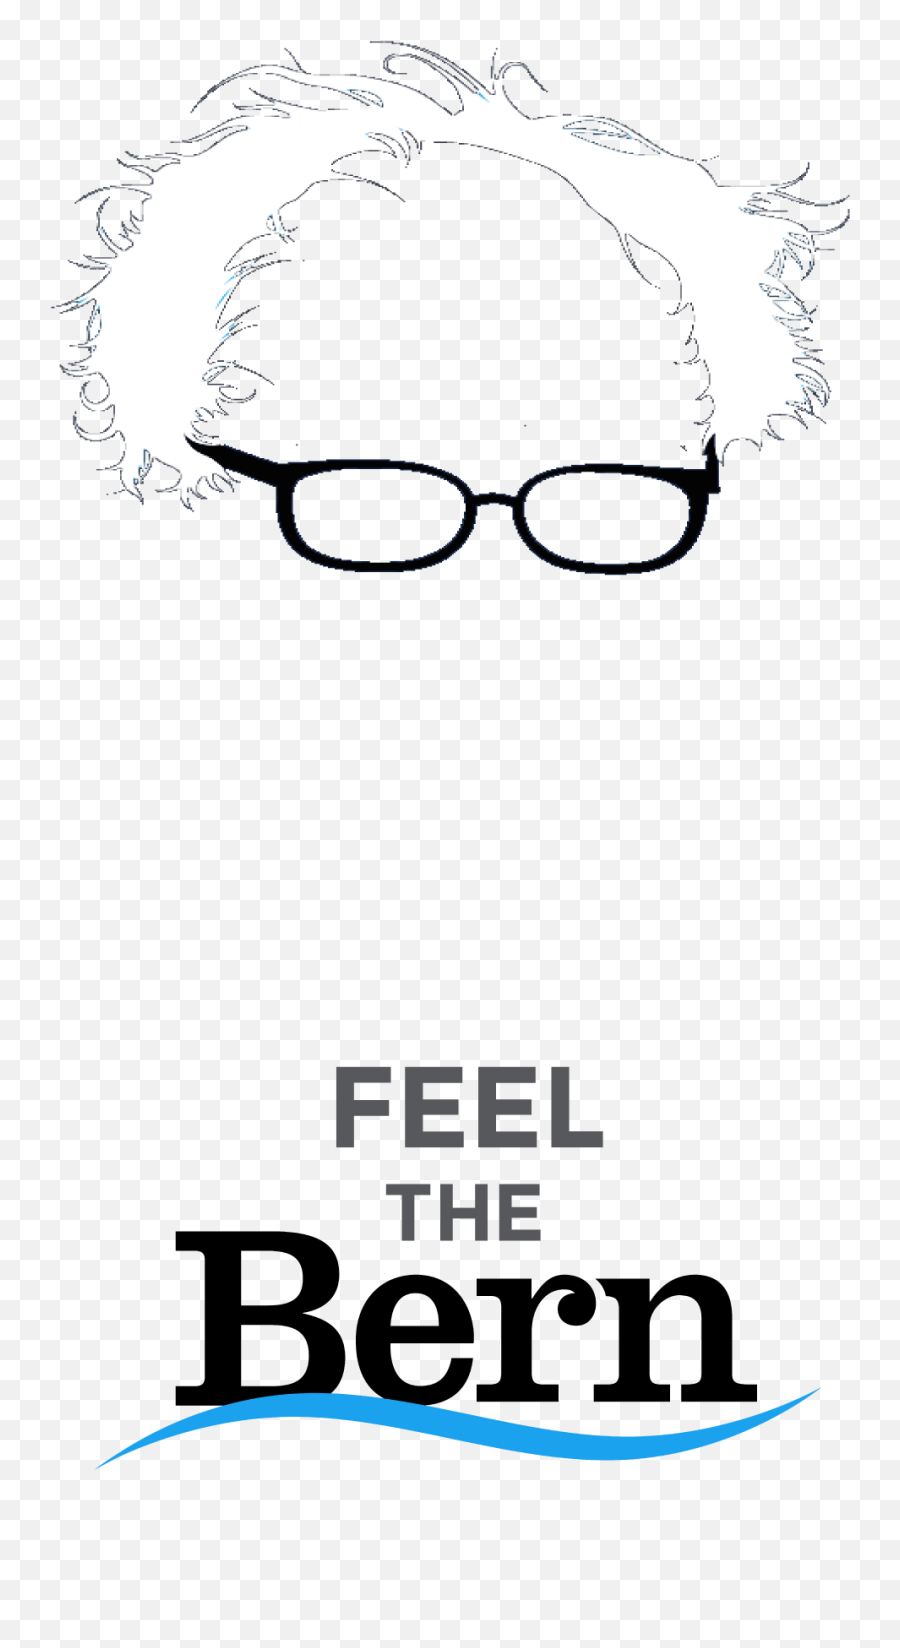 Feel The Bern Snapchat Filters - Line Art Png,Snapchat Filters Transparent